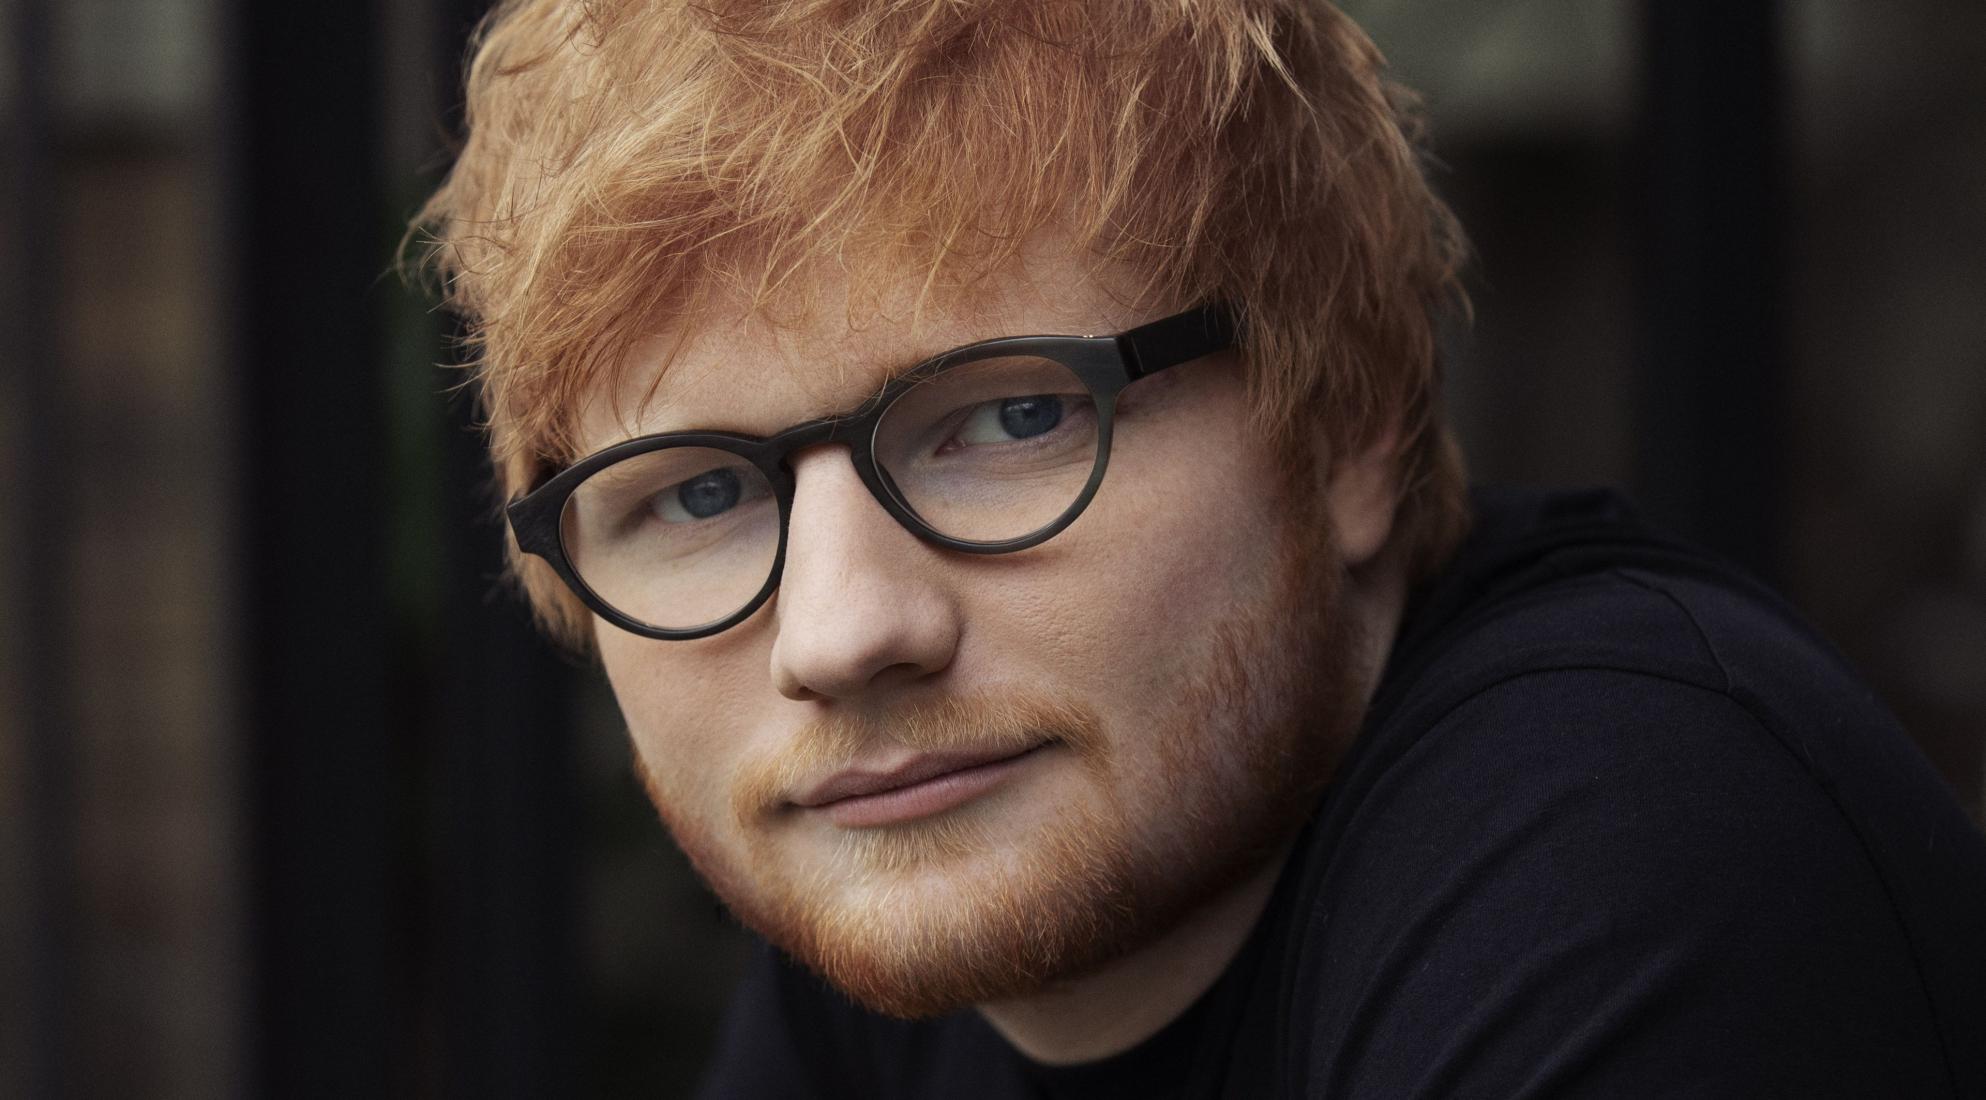 Sheeran Got the Allegedly Copying Gaye's 'Let's Get It On'